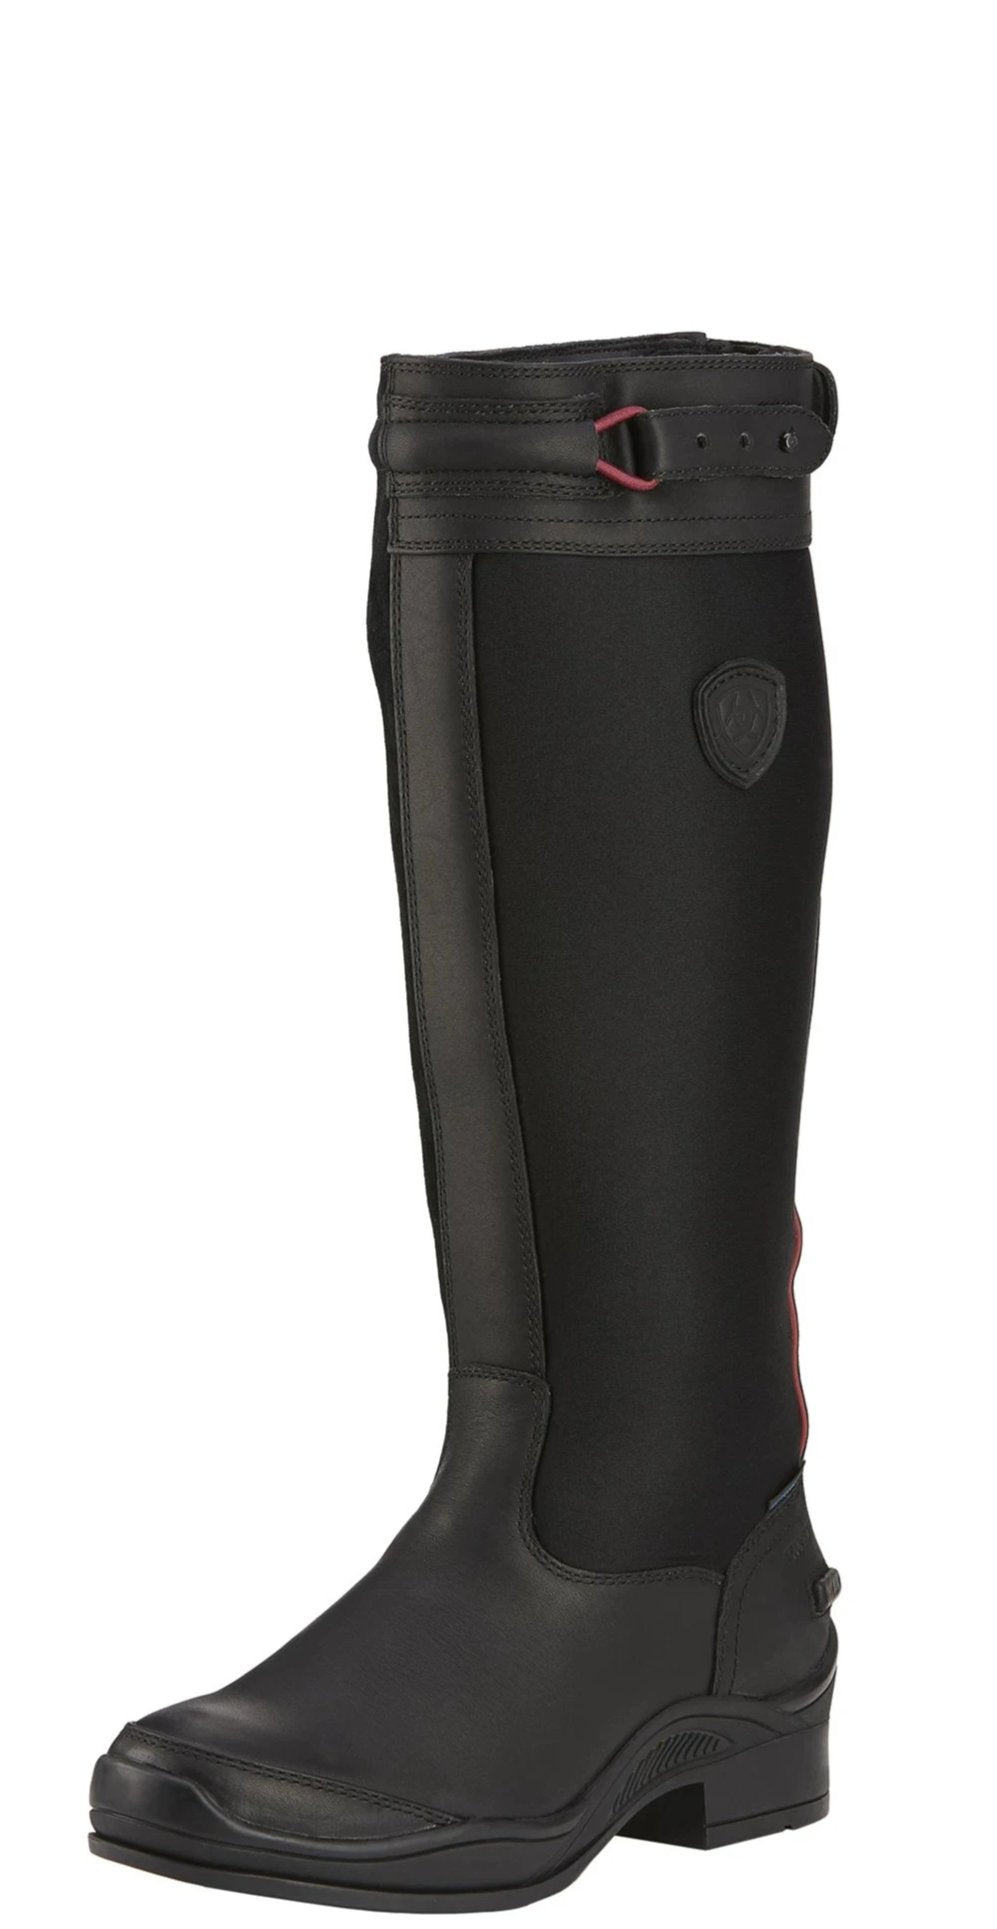 Ariat Extreme Tall Insulated H2O Black